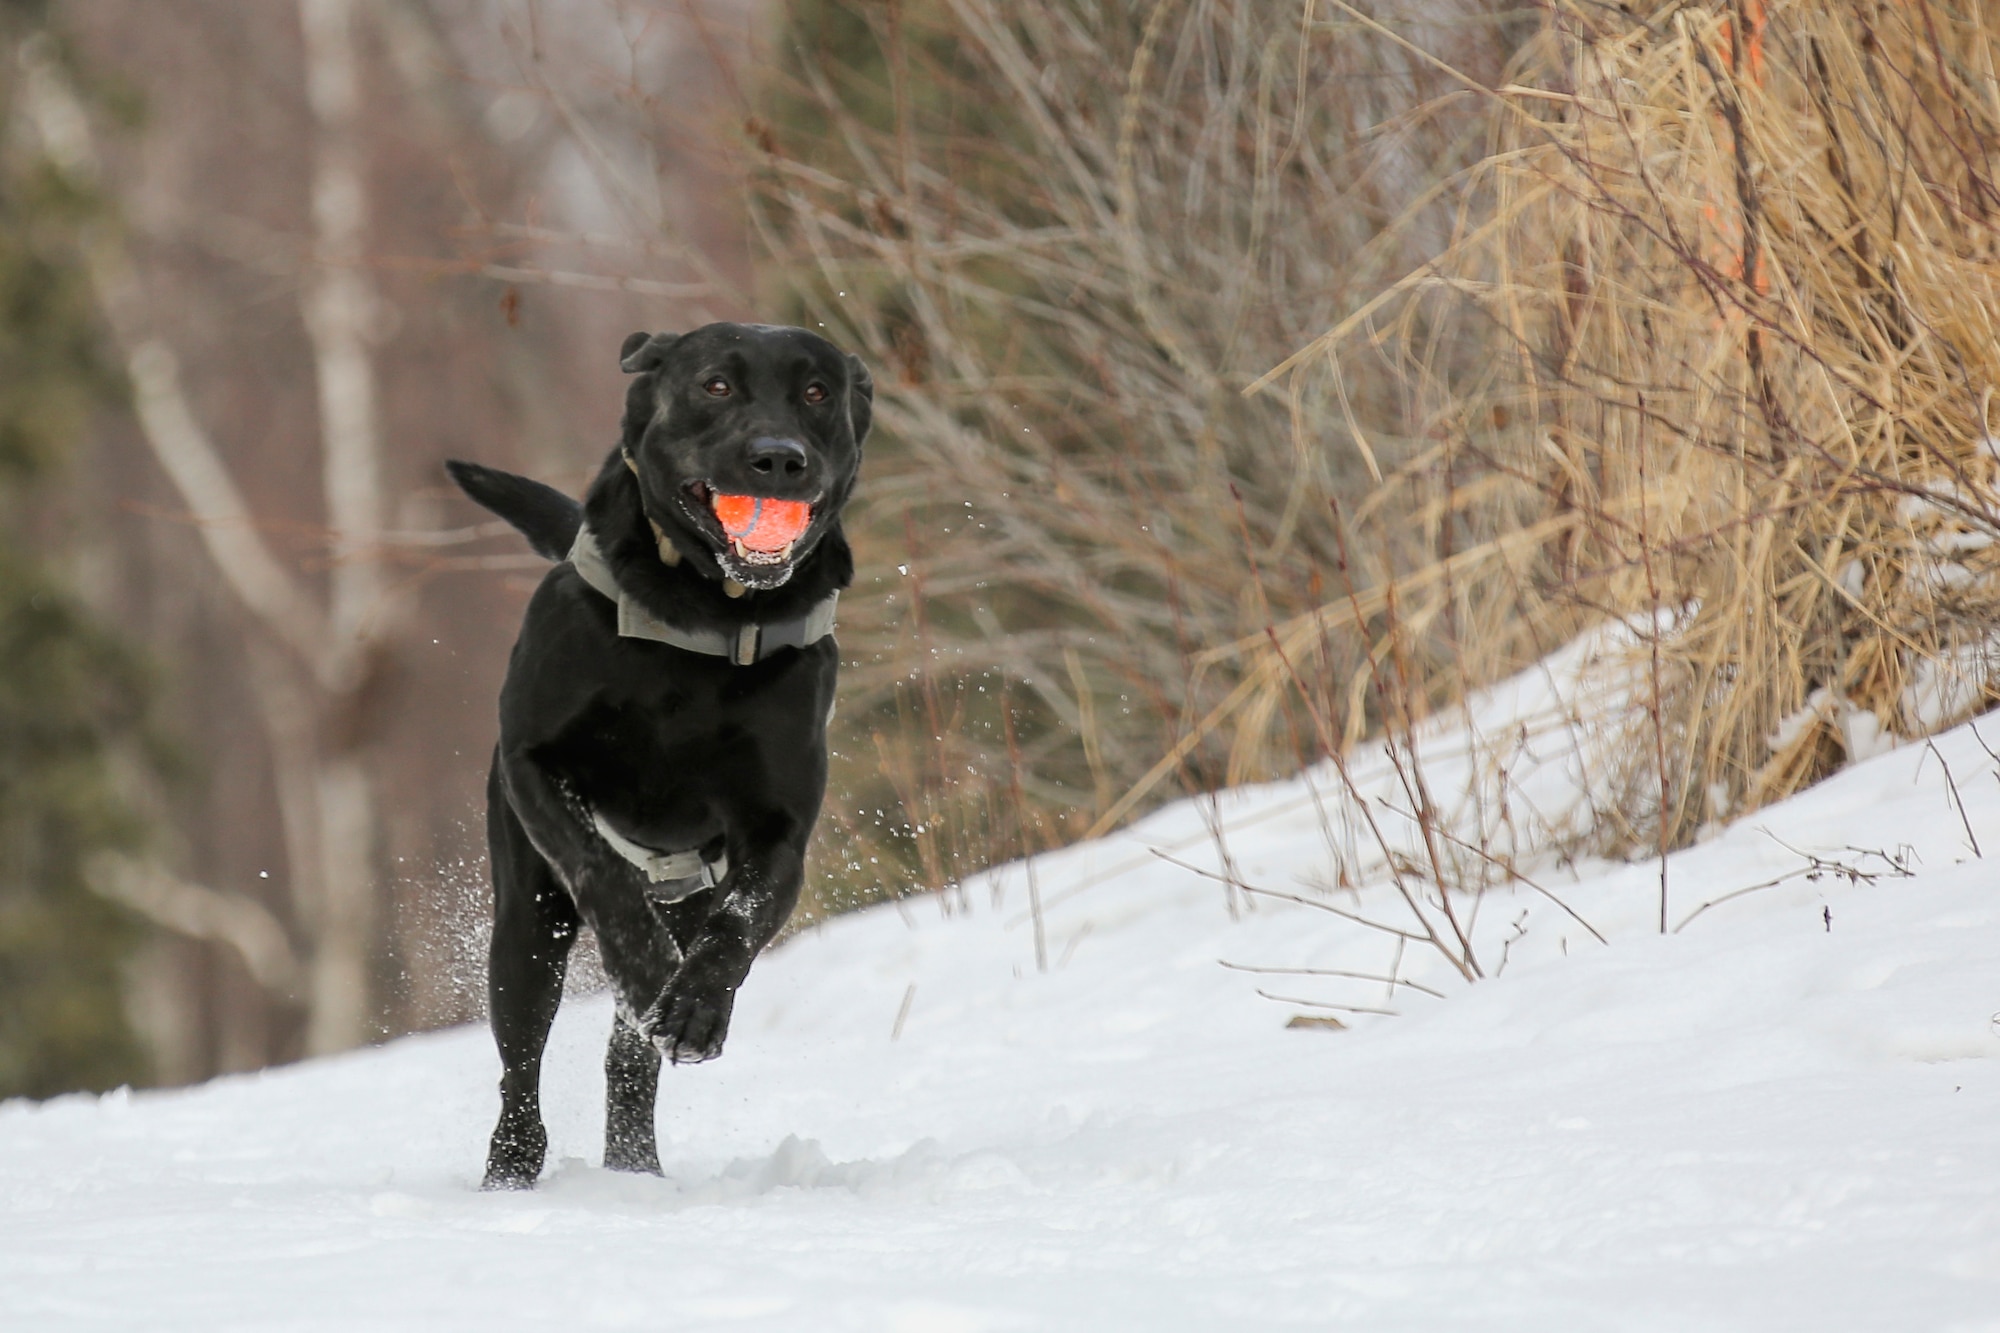 Teddy, a military working dog, frolics after successfully finding a hidden simulated explosive device during K-9 training at Joint Base Elmendorf-Richardson, Alaska, March 17, 2016. Air Force photo by Alejandro Pena